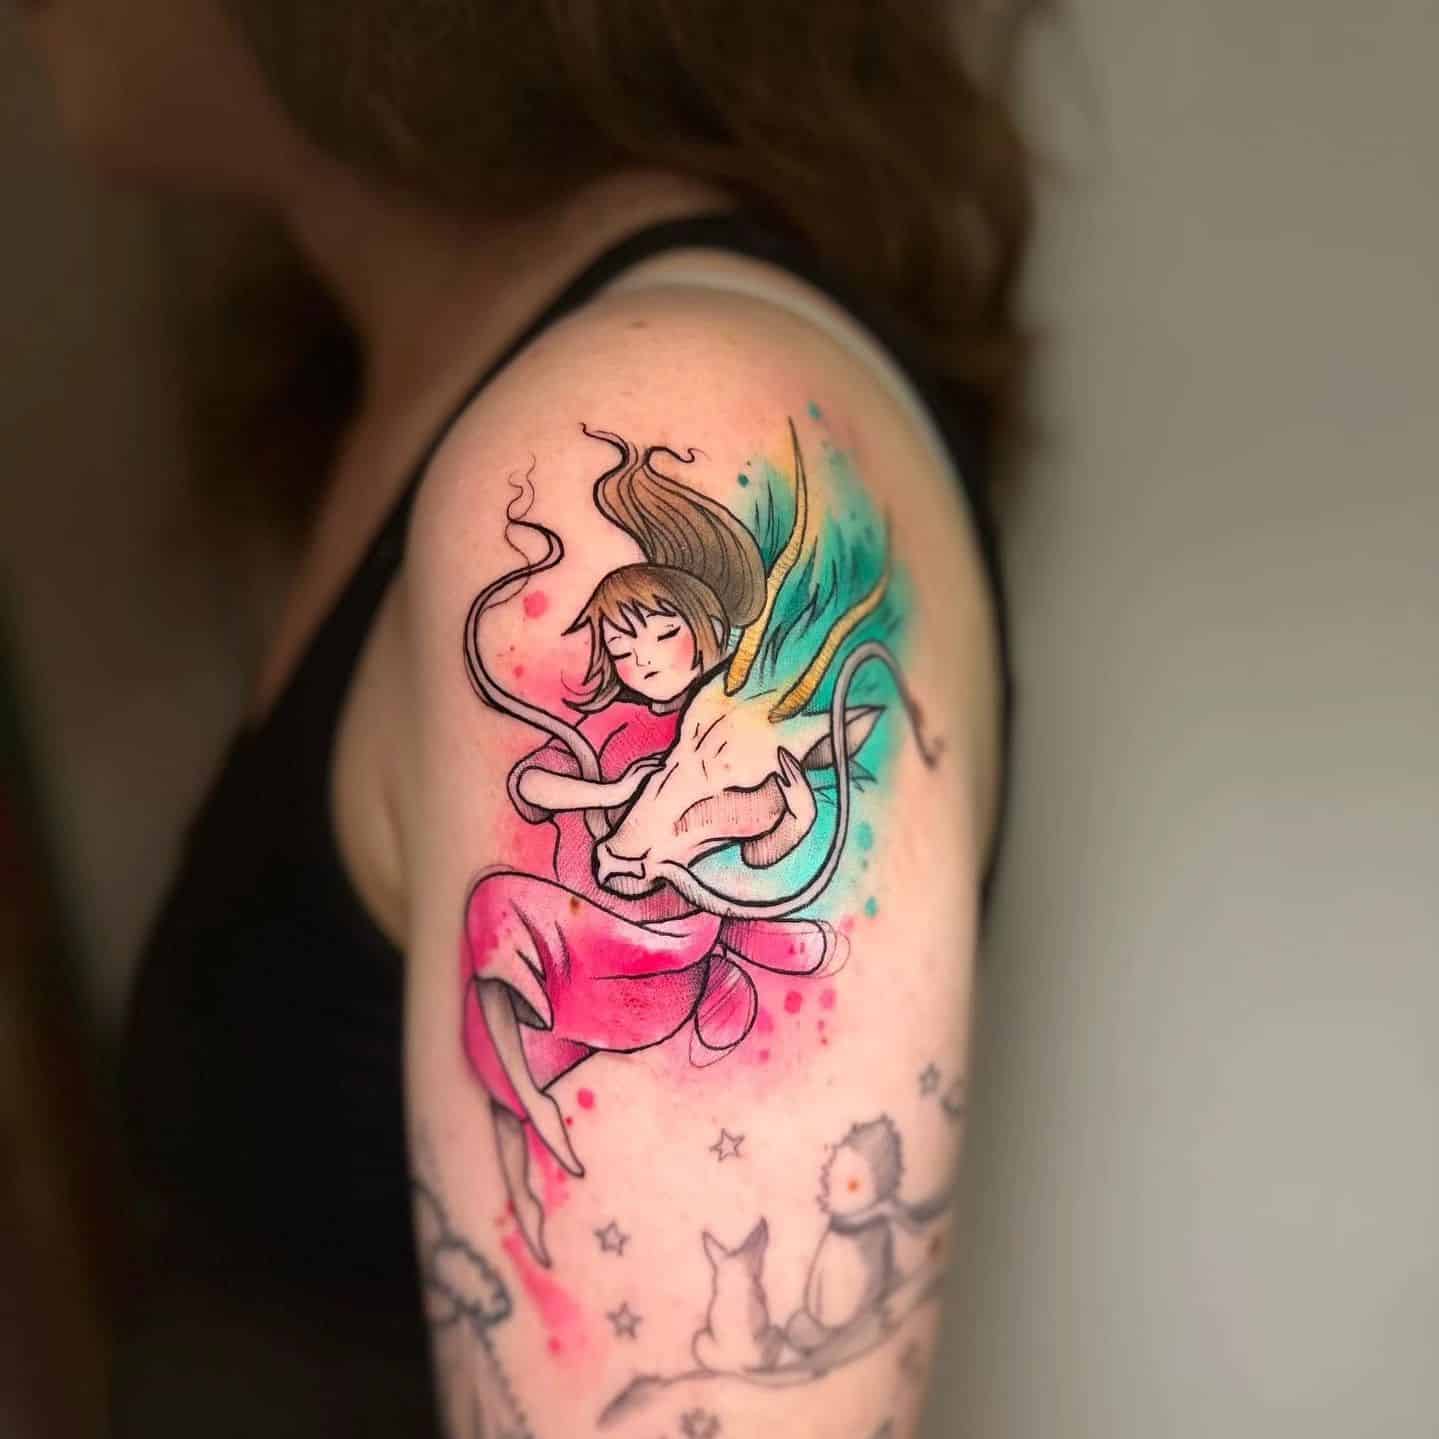 Mad Chef Tattoo - Little fairy 🖤 Tattoo done by Adam! | Facebook